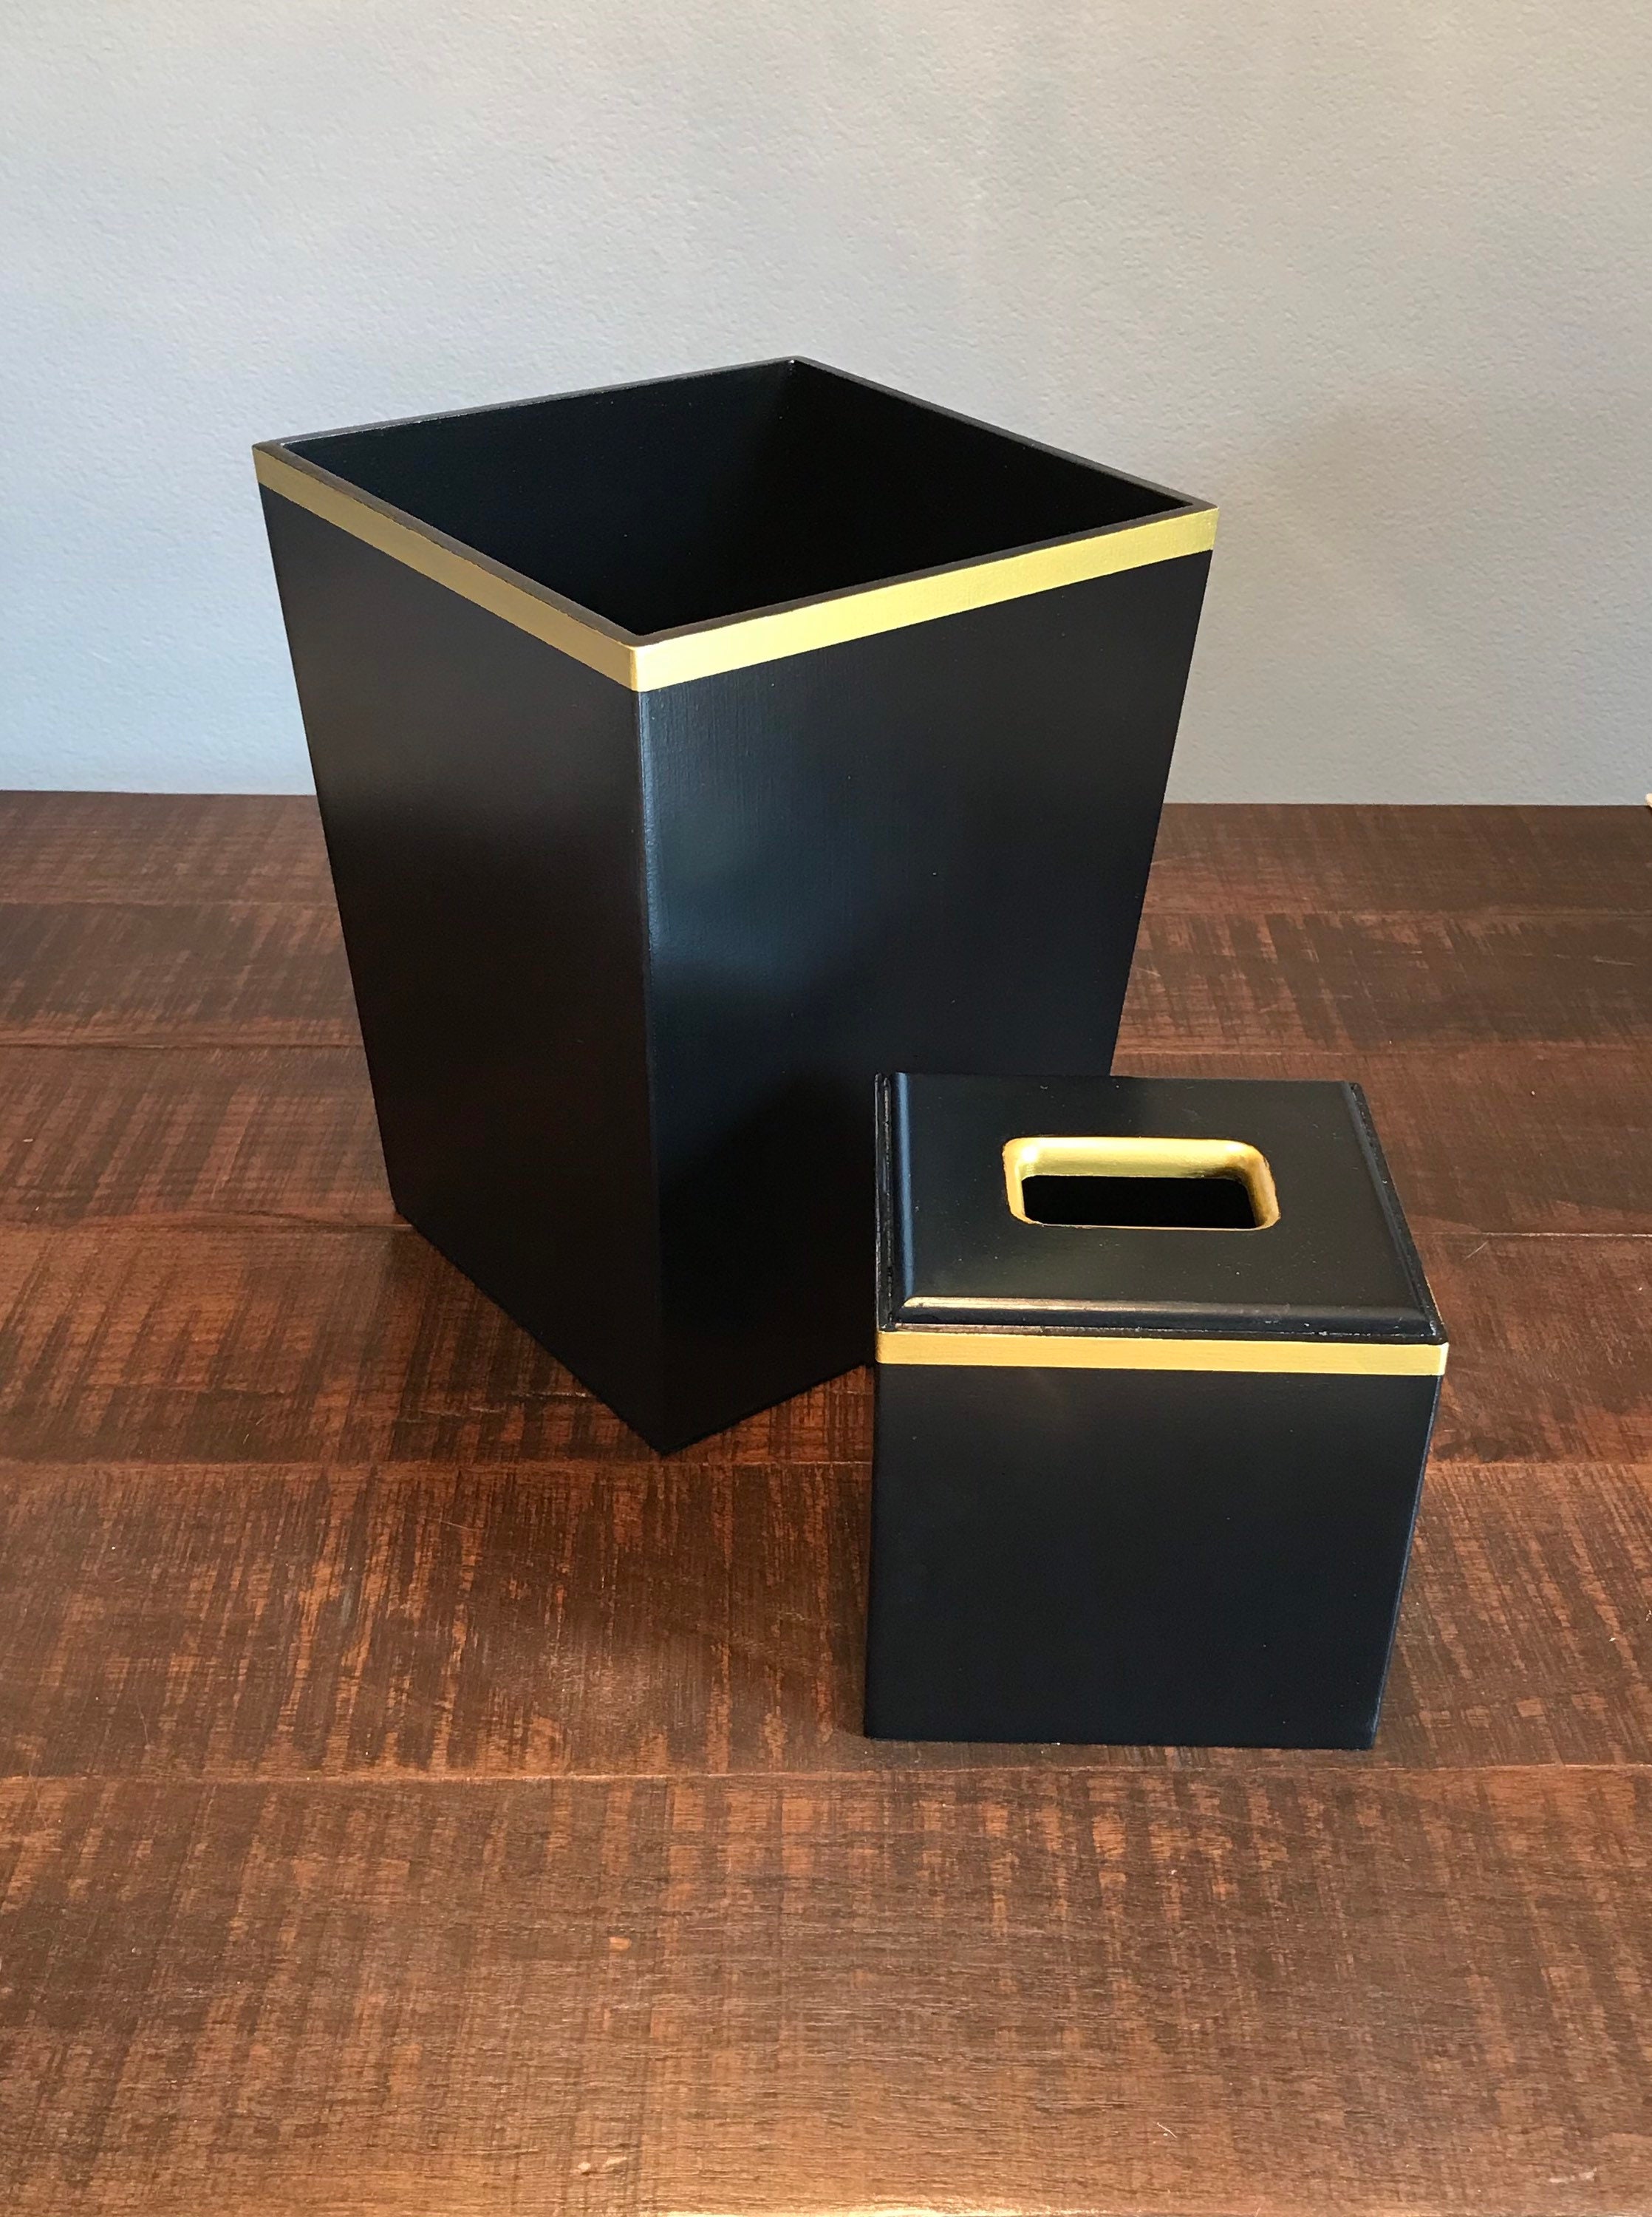 Trash Can, Wooden Tissue Box, Black and Gold, Waste Basket, Wooden